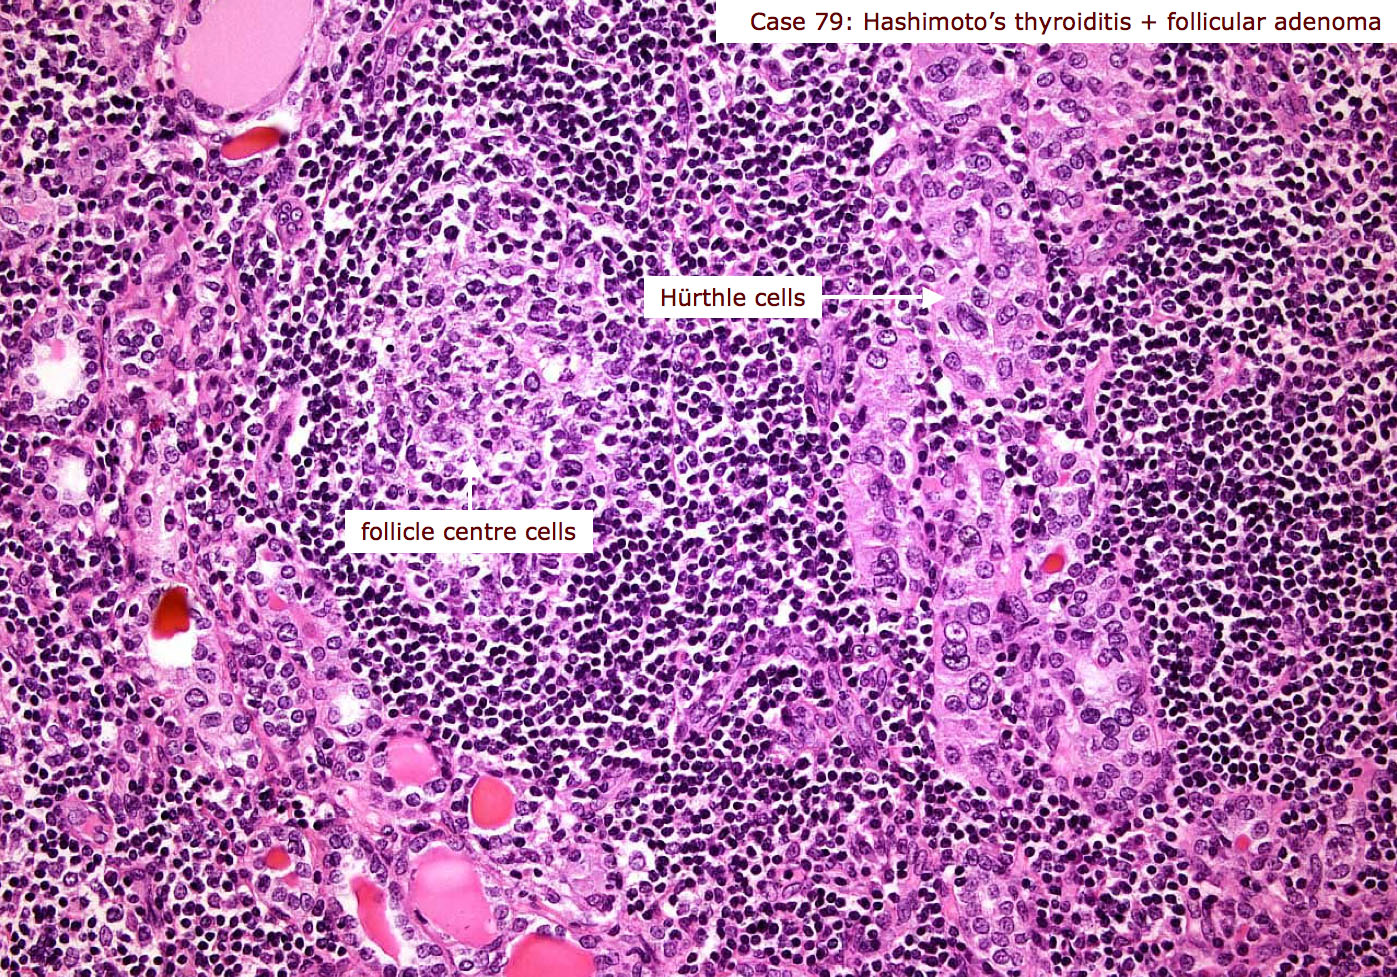 Biopsy demonstrating Hurtle cells in a patient that also has thyroid cancer (source)